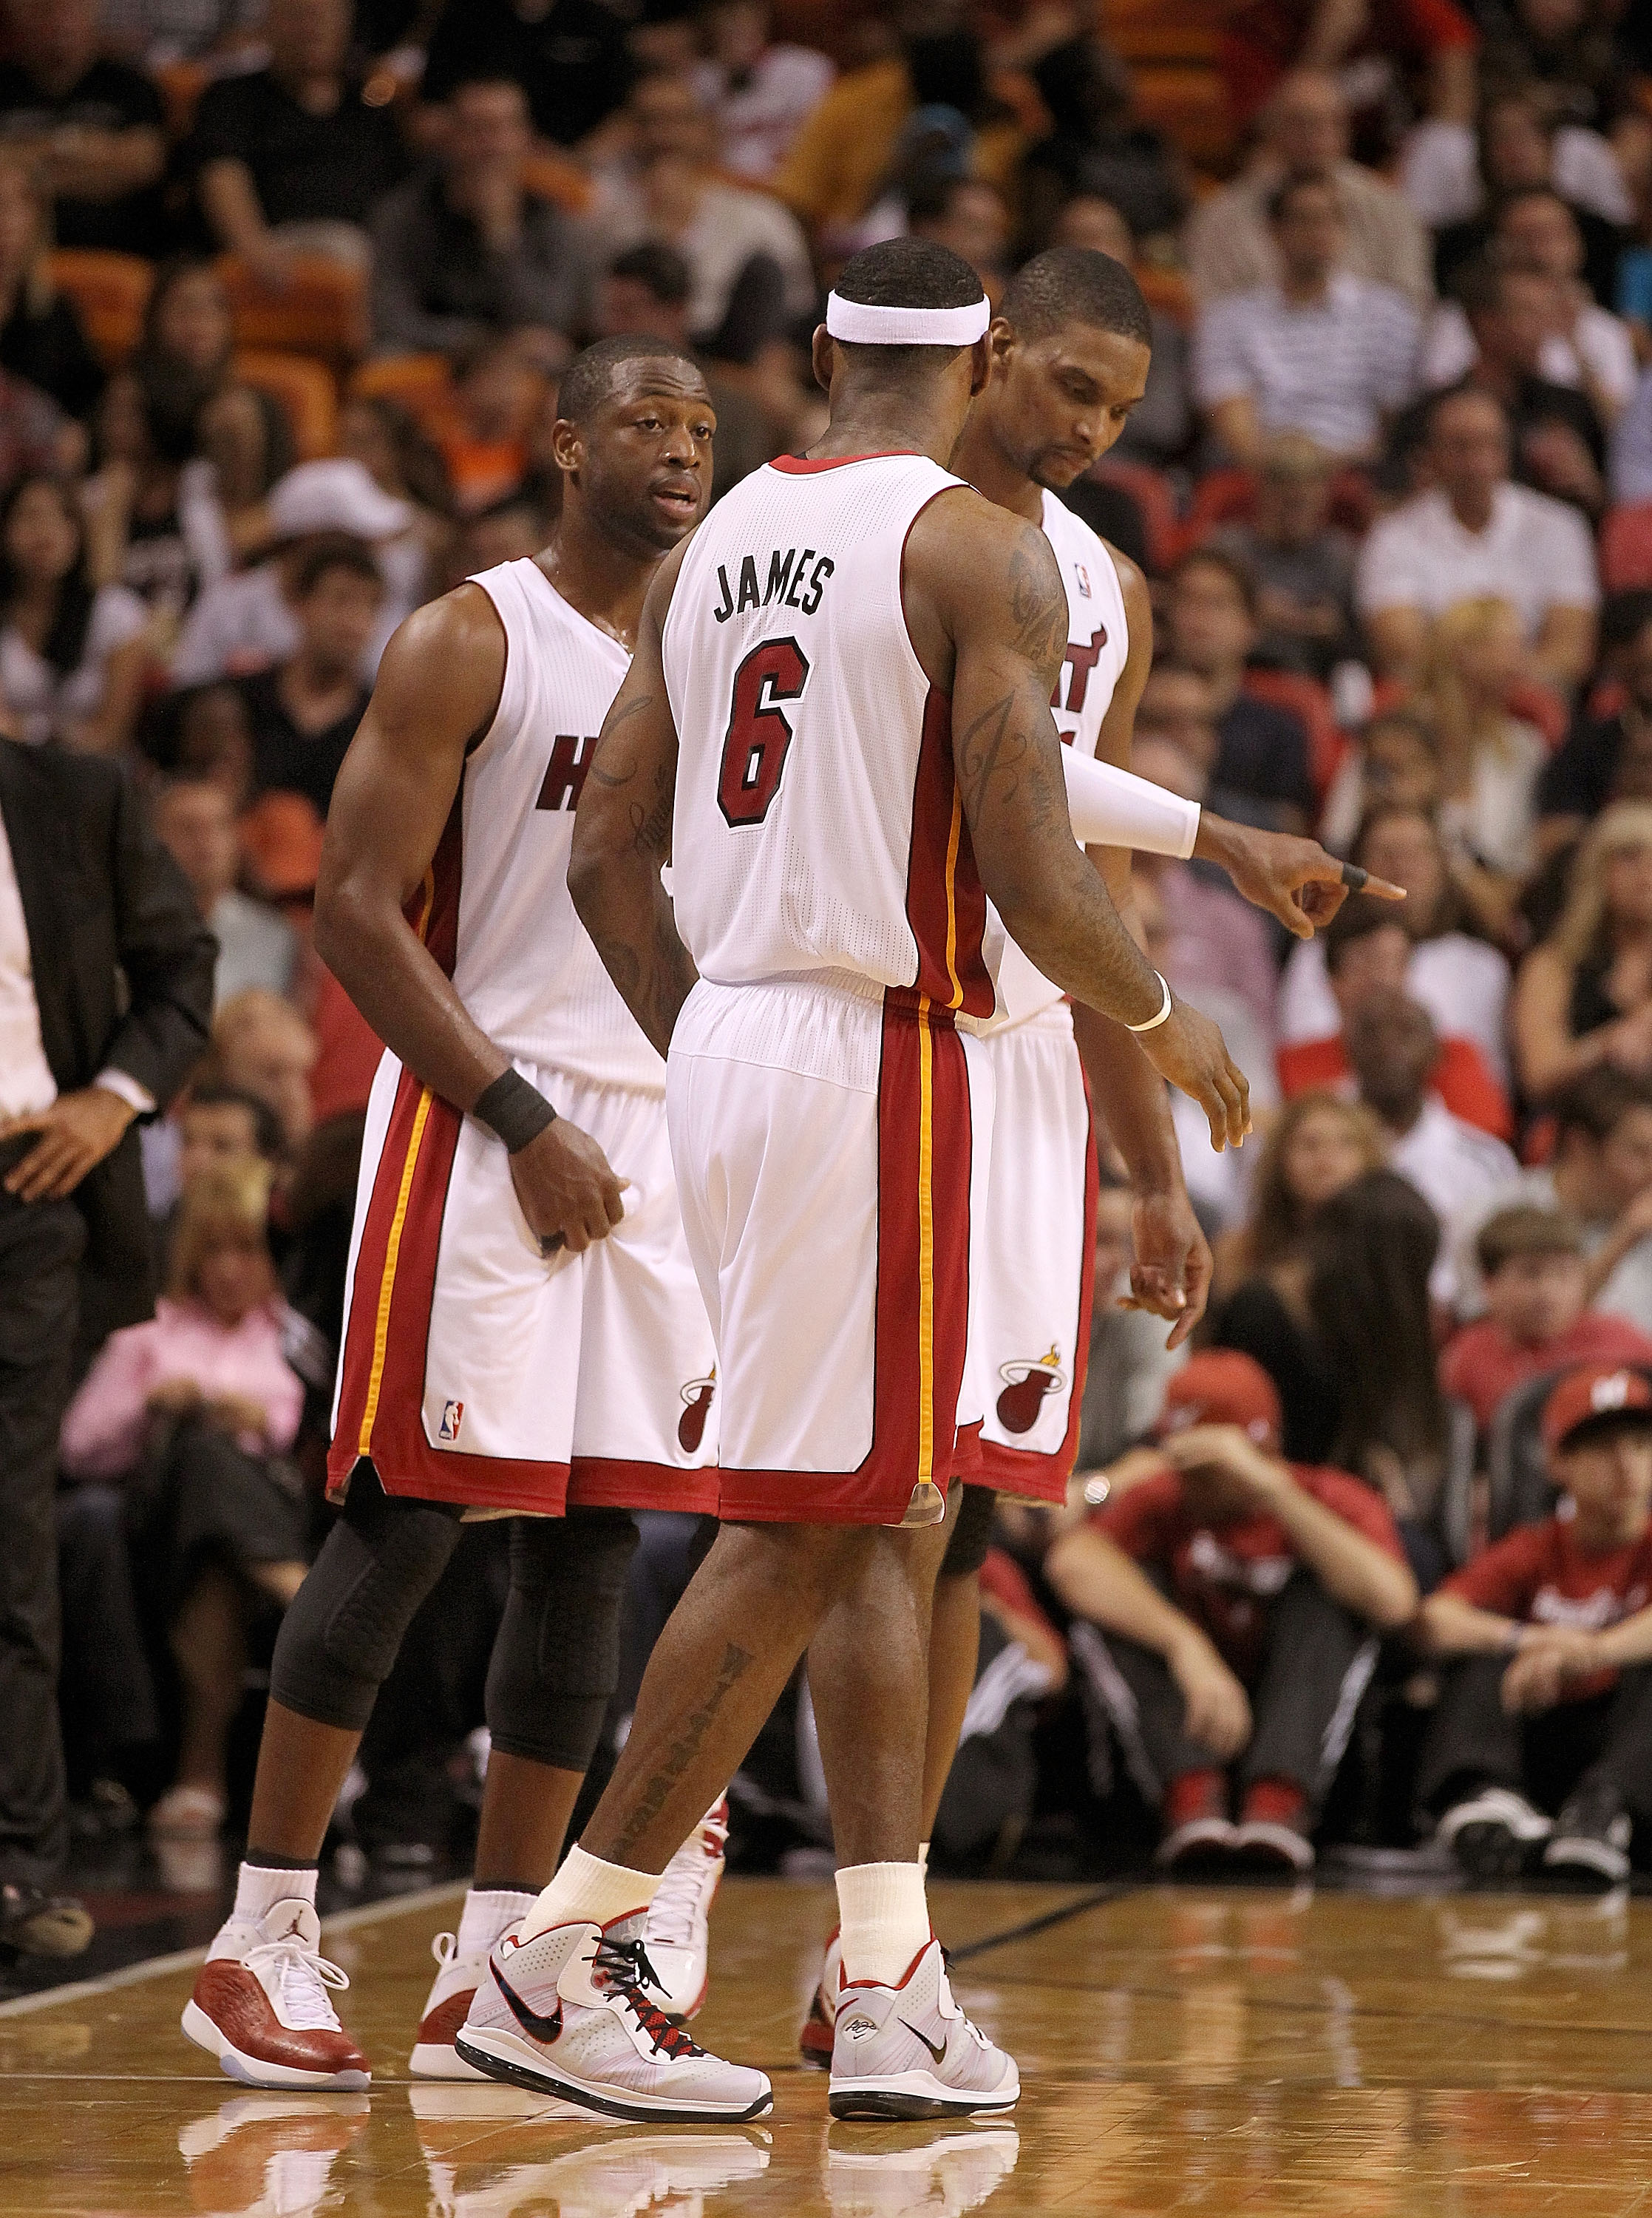 MIAMI, FL - FEBRUARY 25:  LeBron James #6, Dwyane Wade #3, and Chris Bosh #1 of the Miami Heat talk during a game against the Washington Wizards at American Airlines Arena on February 25, 2011 in Miami, Florida. NOTE TO USER: User expressly acknowledges a